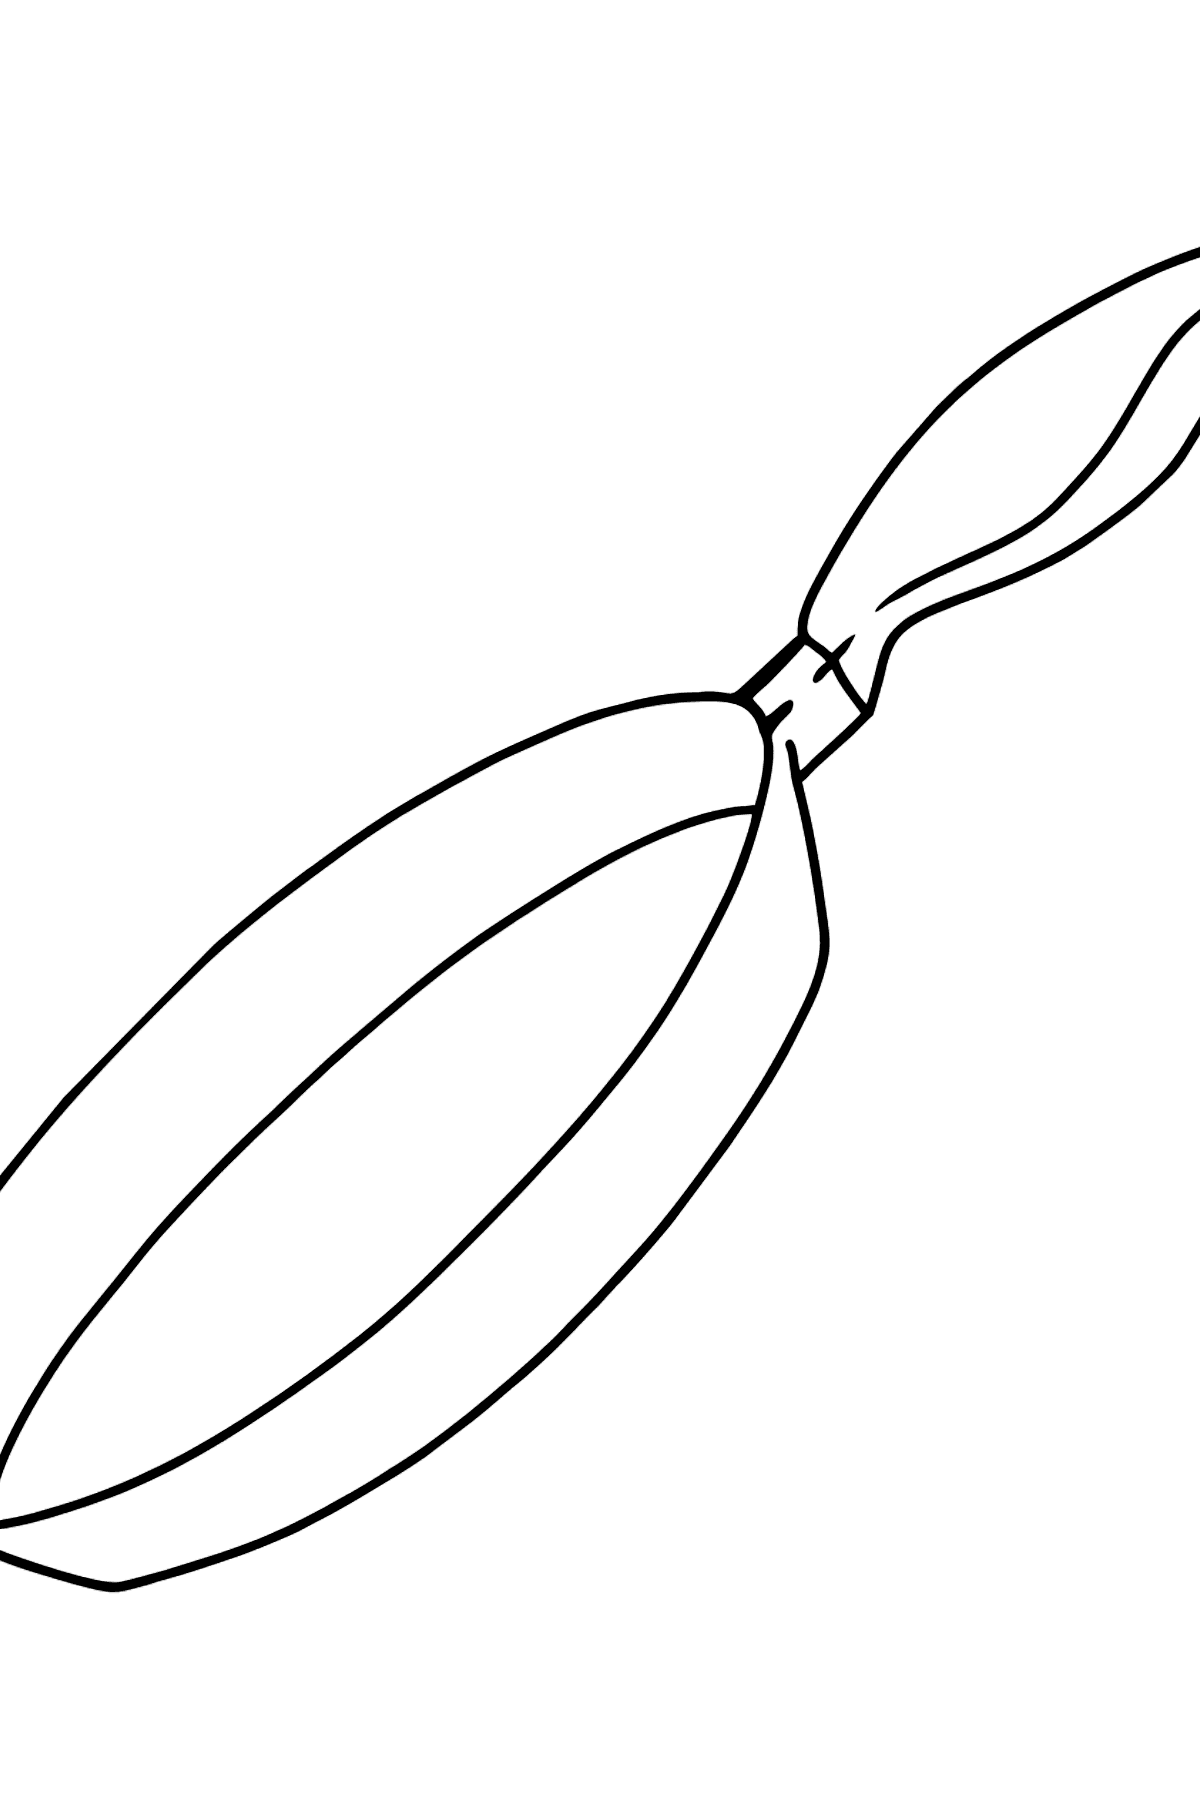 Frying Pan coloring page - Coloring Pages for Kids